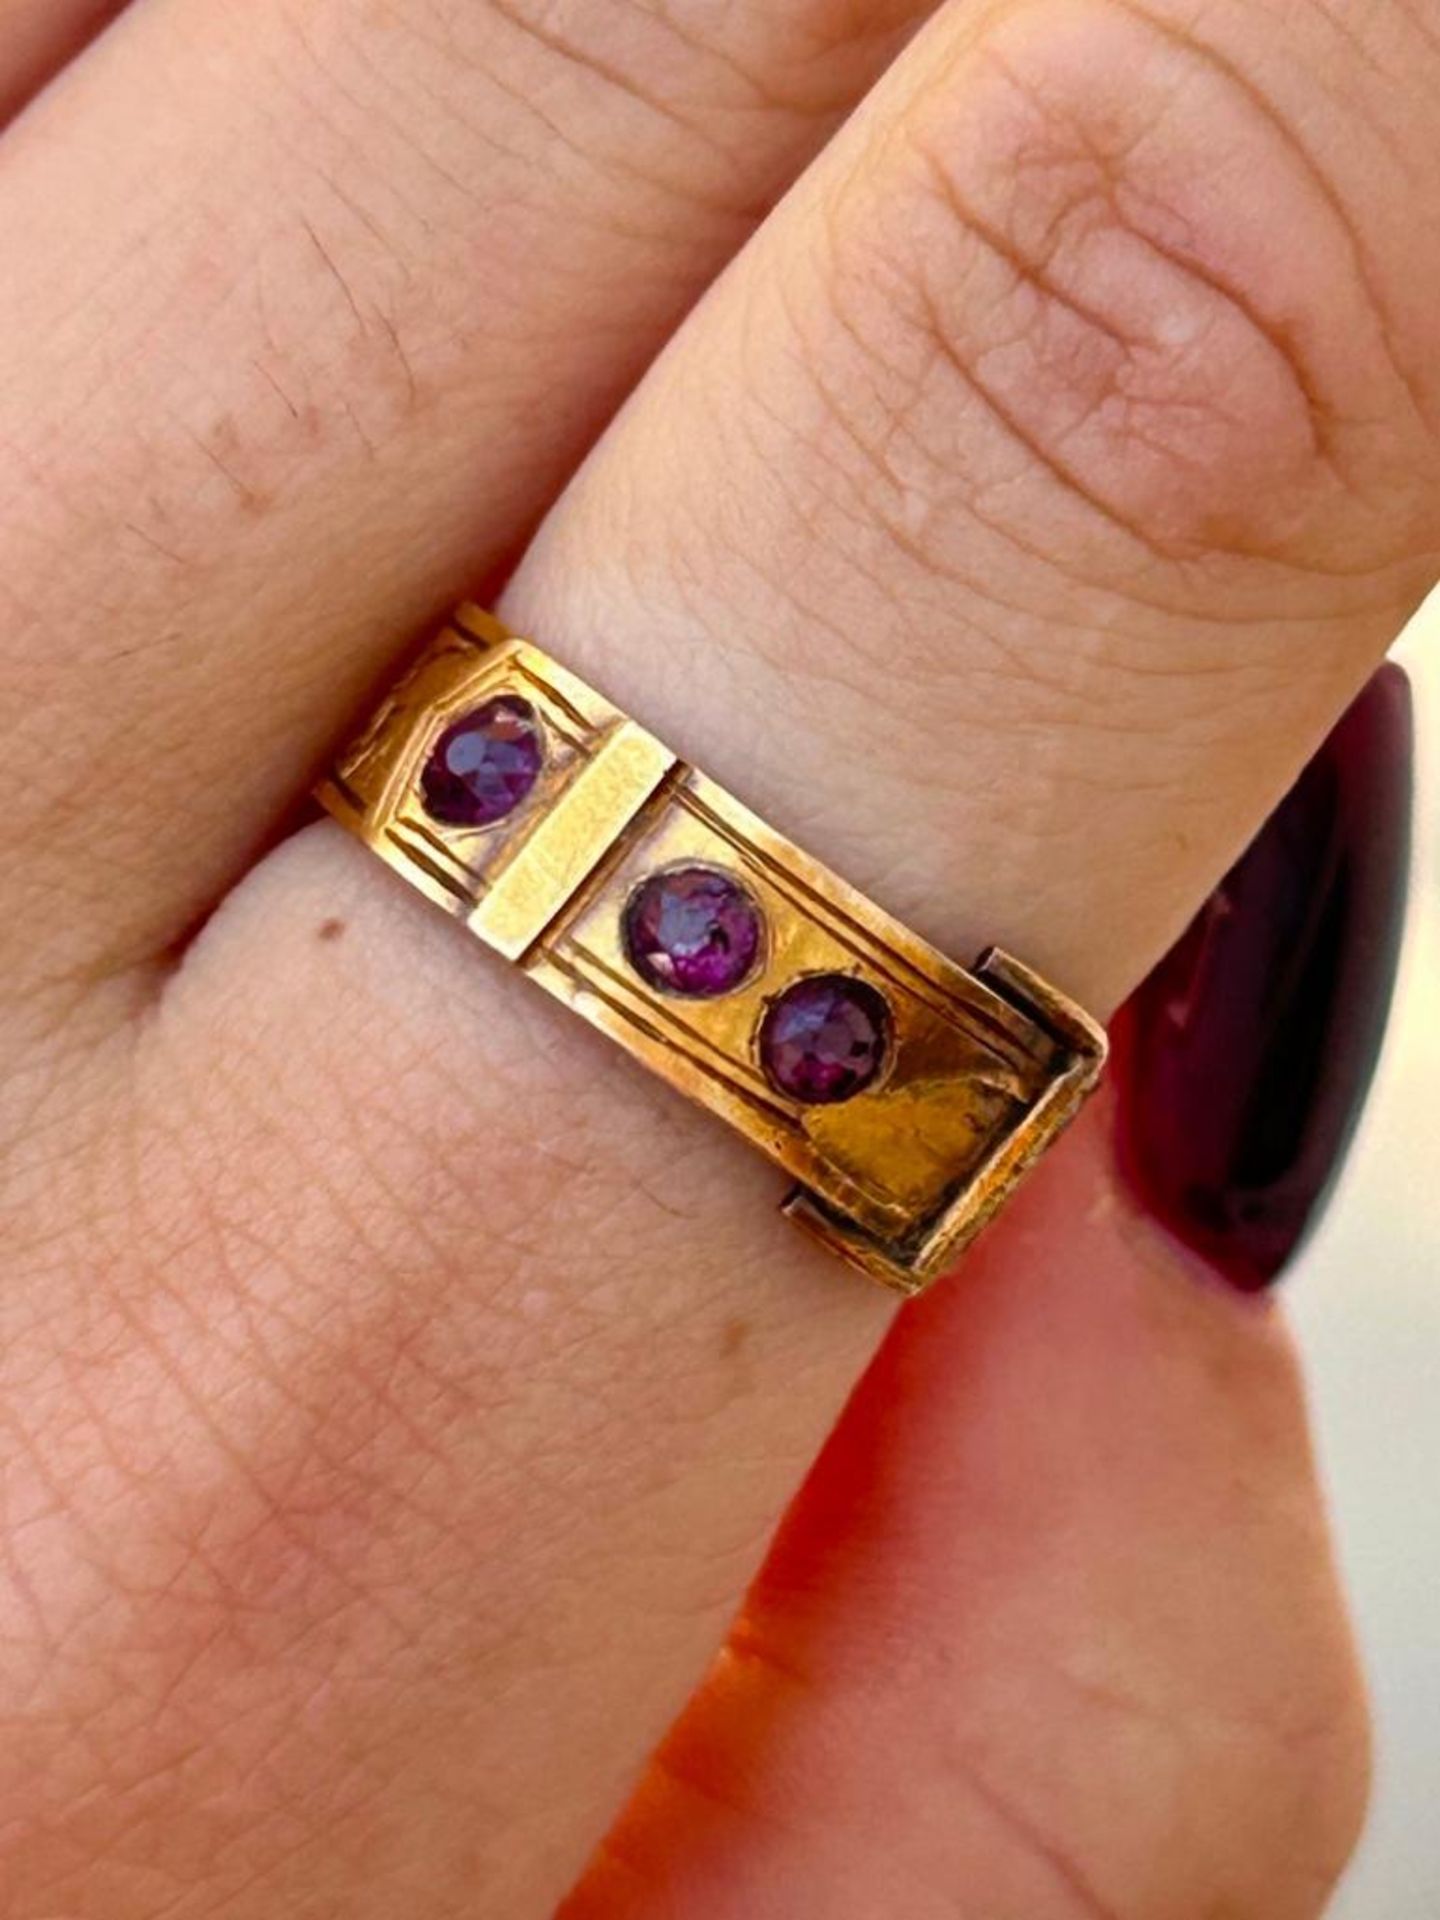 Chunky 18ct Gold Buckle Ring with Amethyst - Image 2 of 8